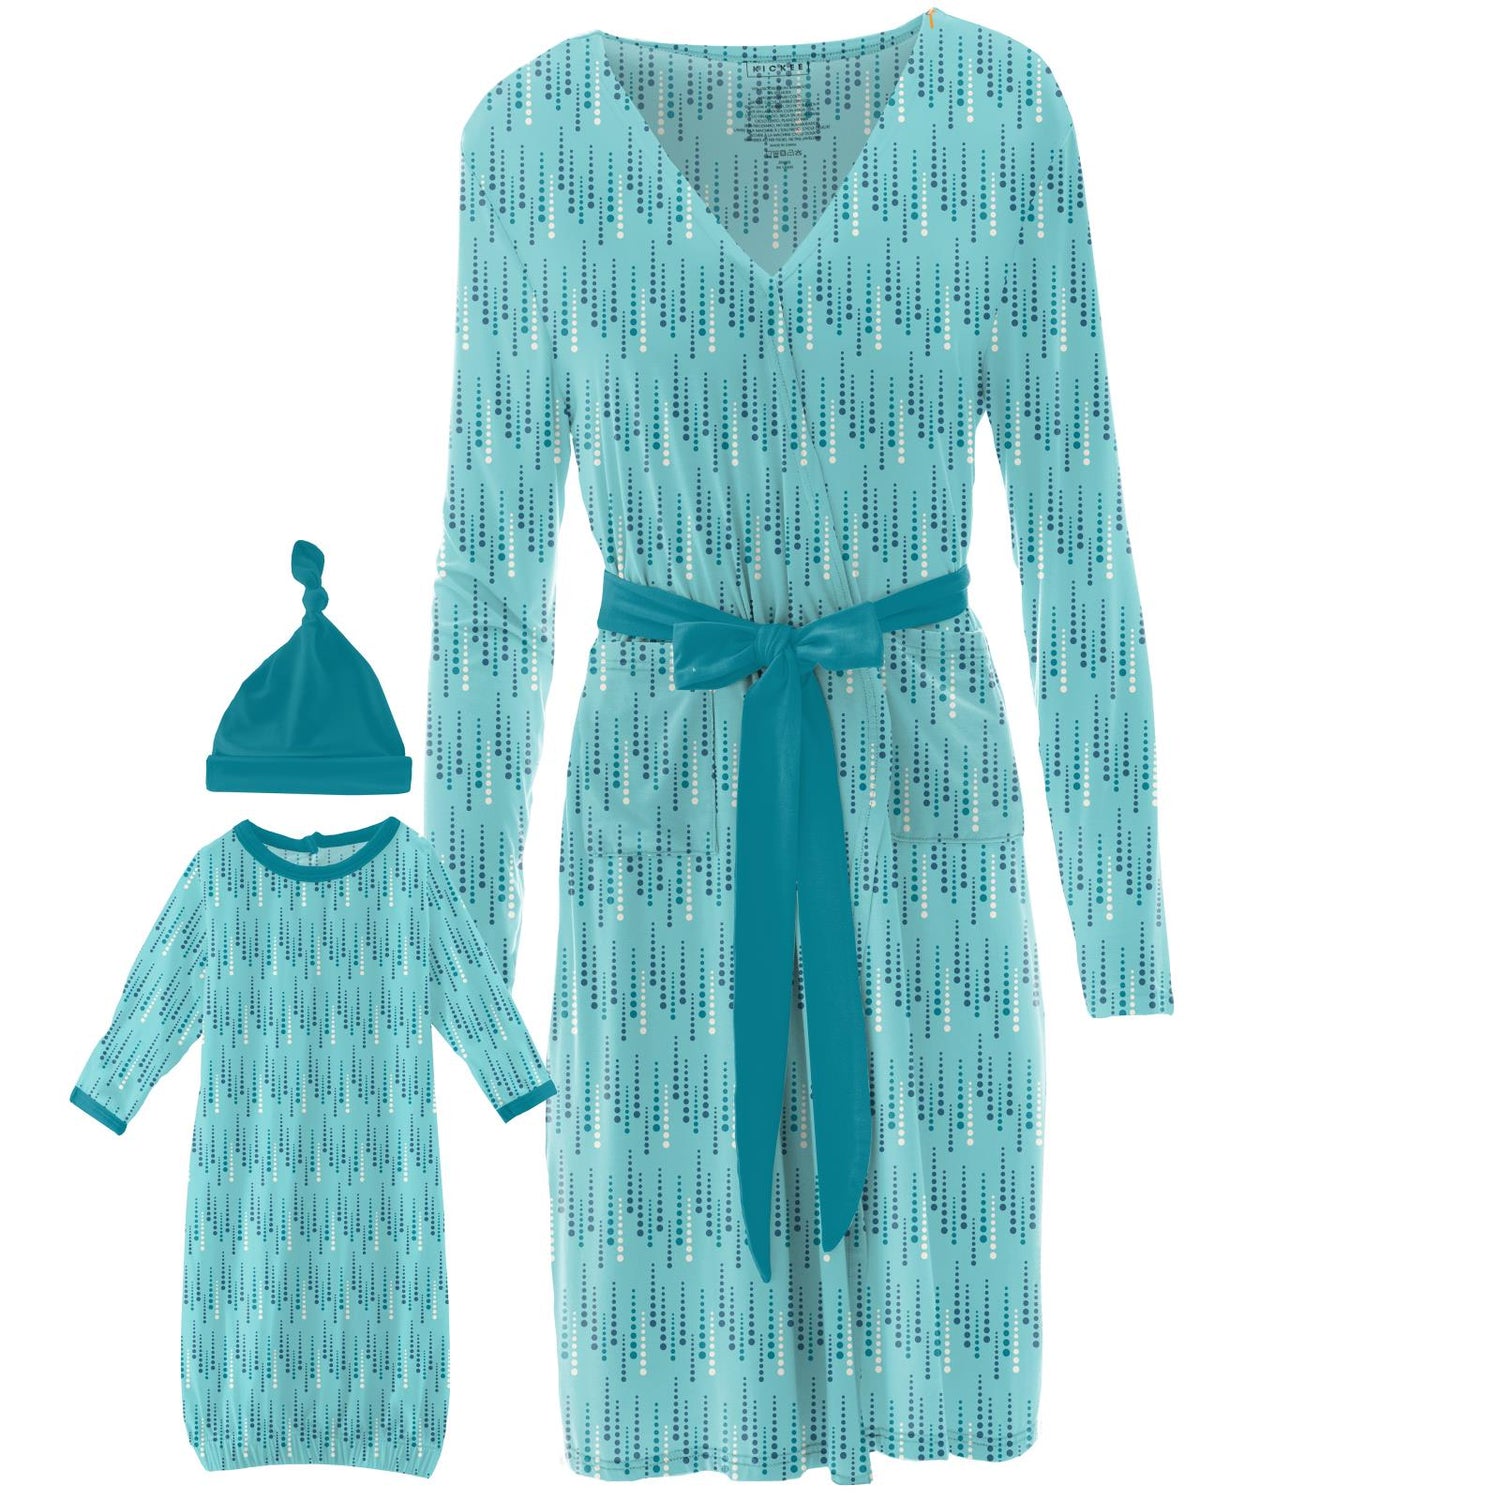 Women's Maternity/Nursing Robe & Layette Gown Set in Iceberg Icicles